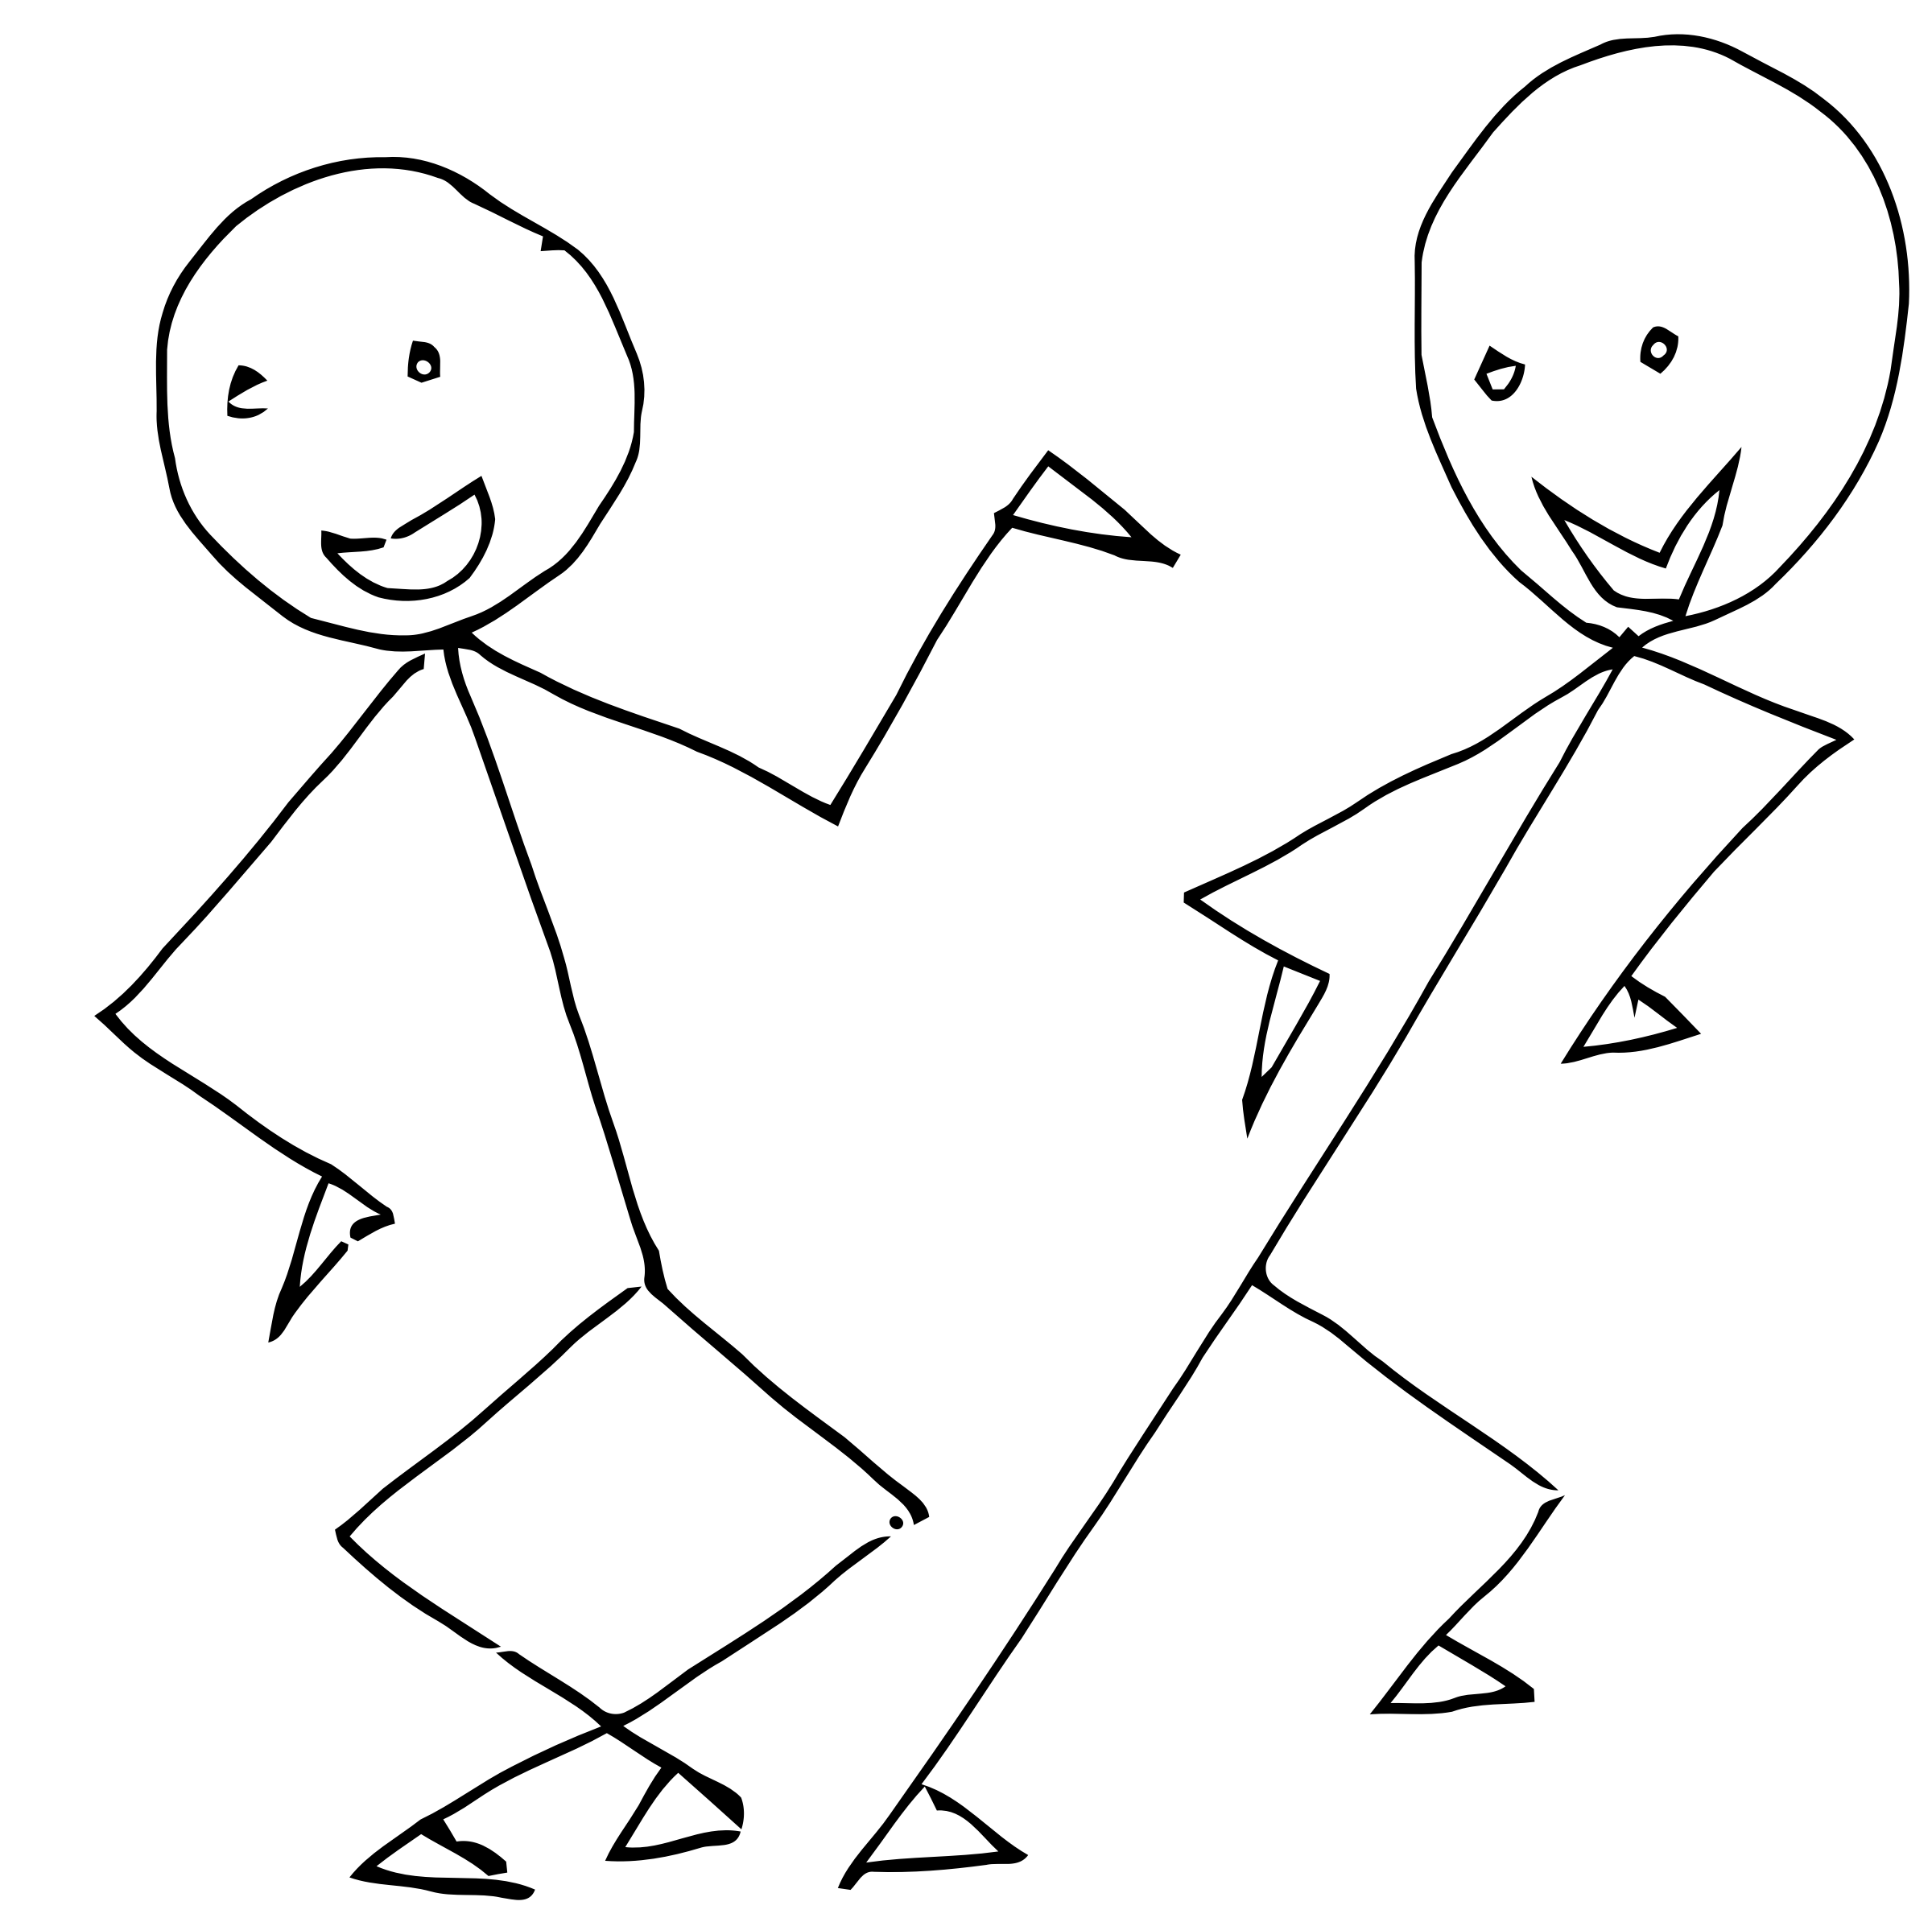 stick figures online drawing